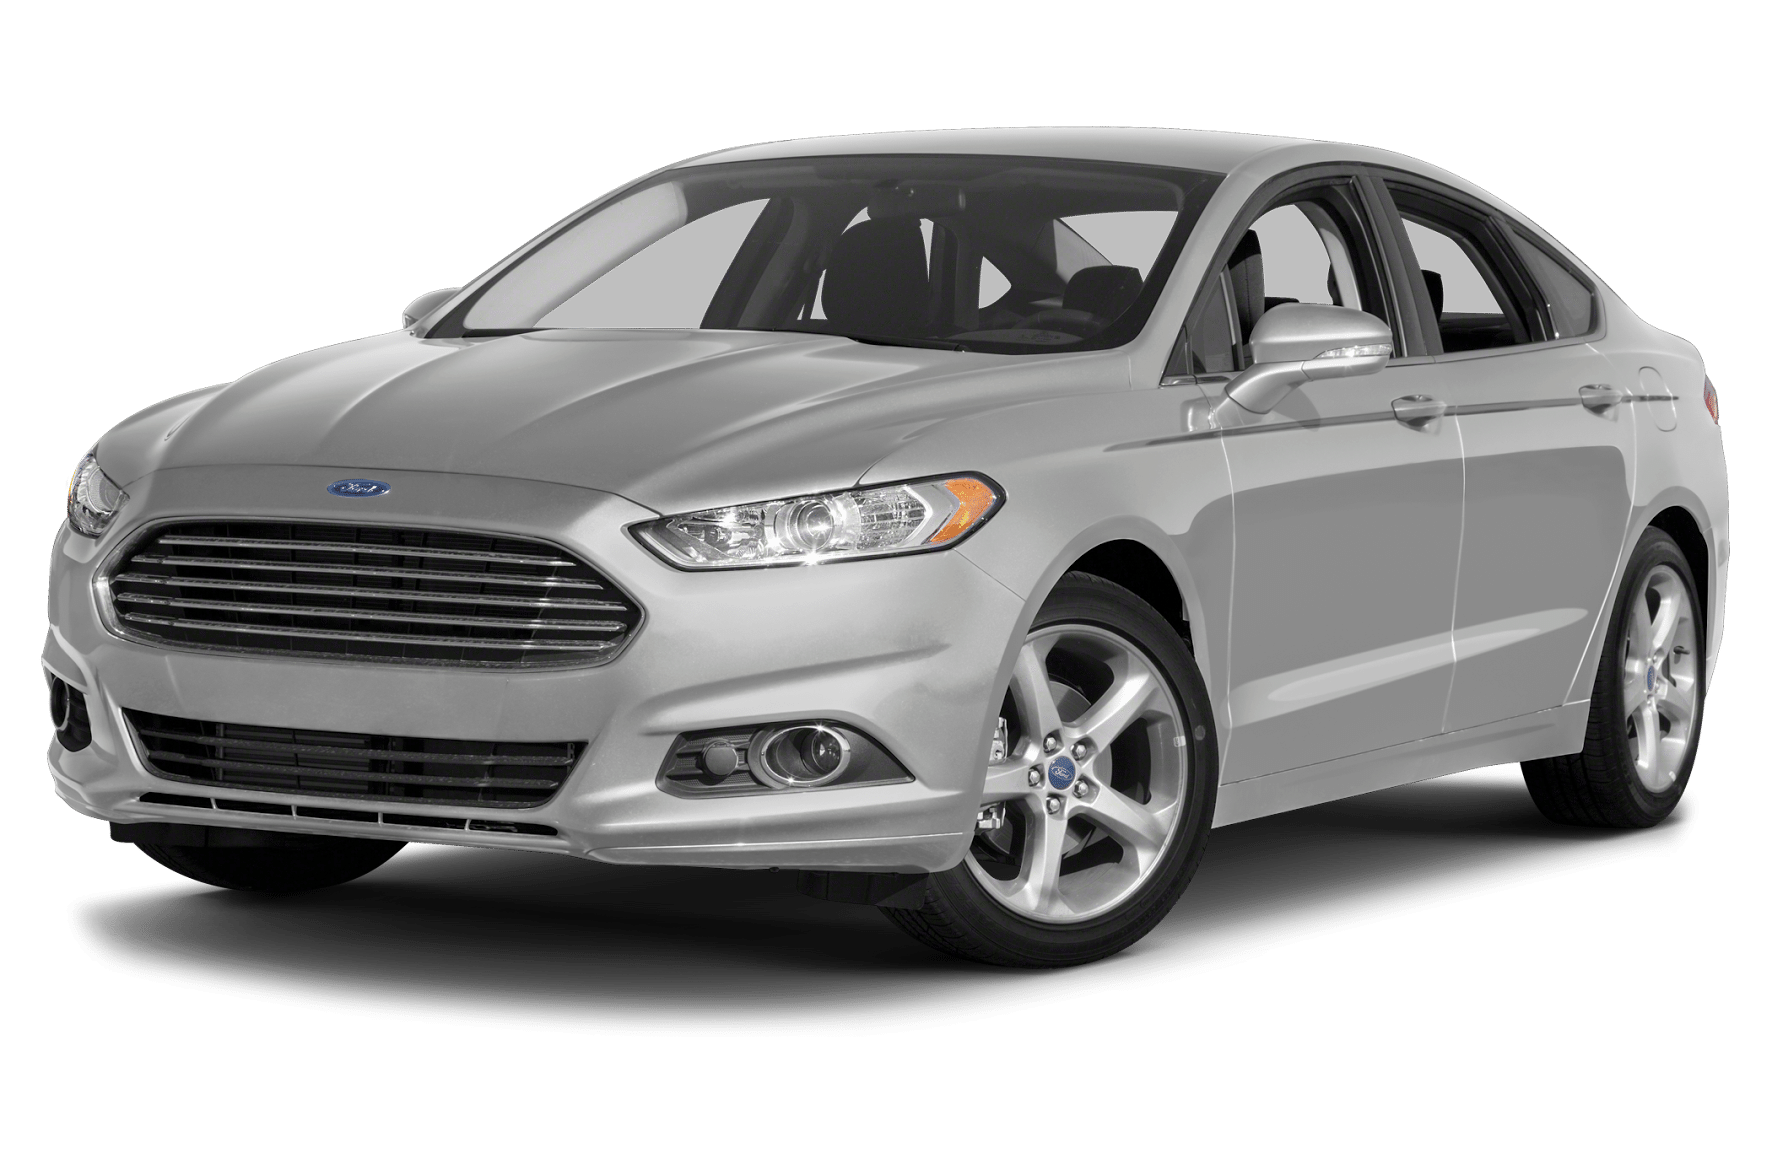 Ford is recalling 1.3 million mid-size sedans for brake issue